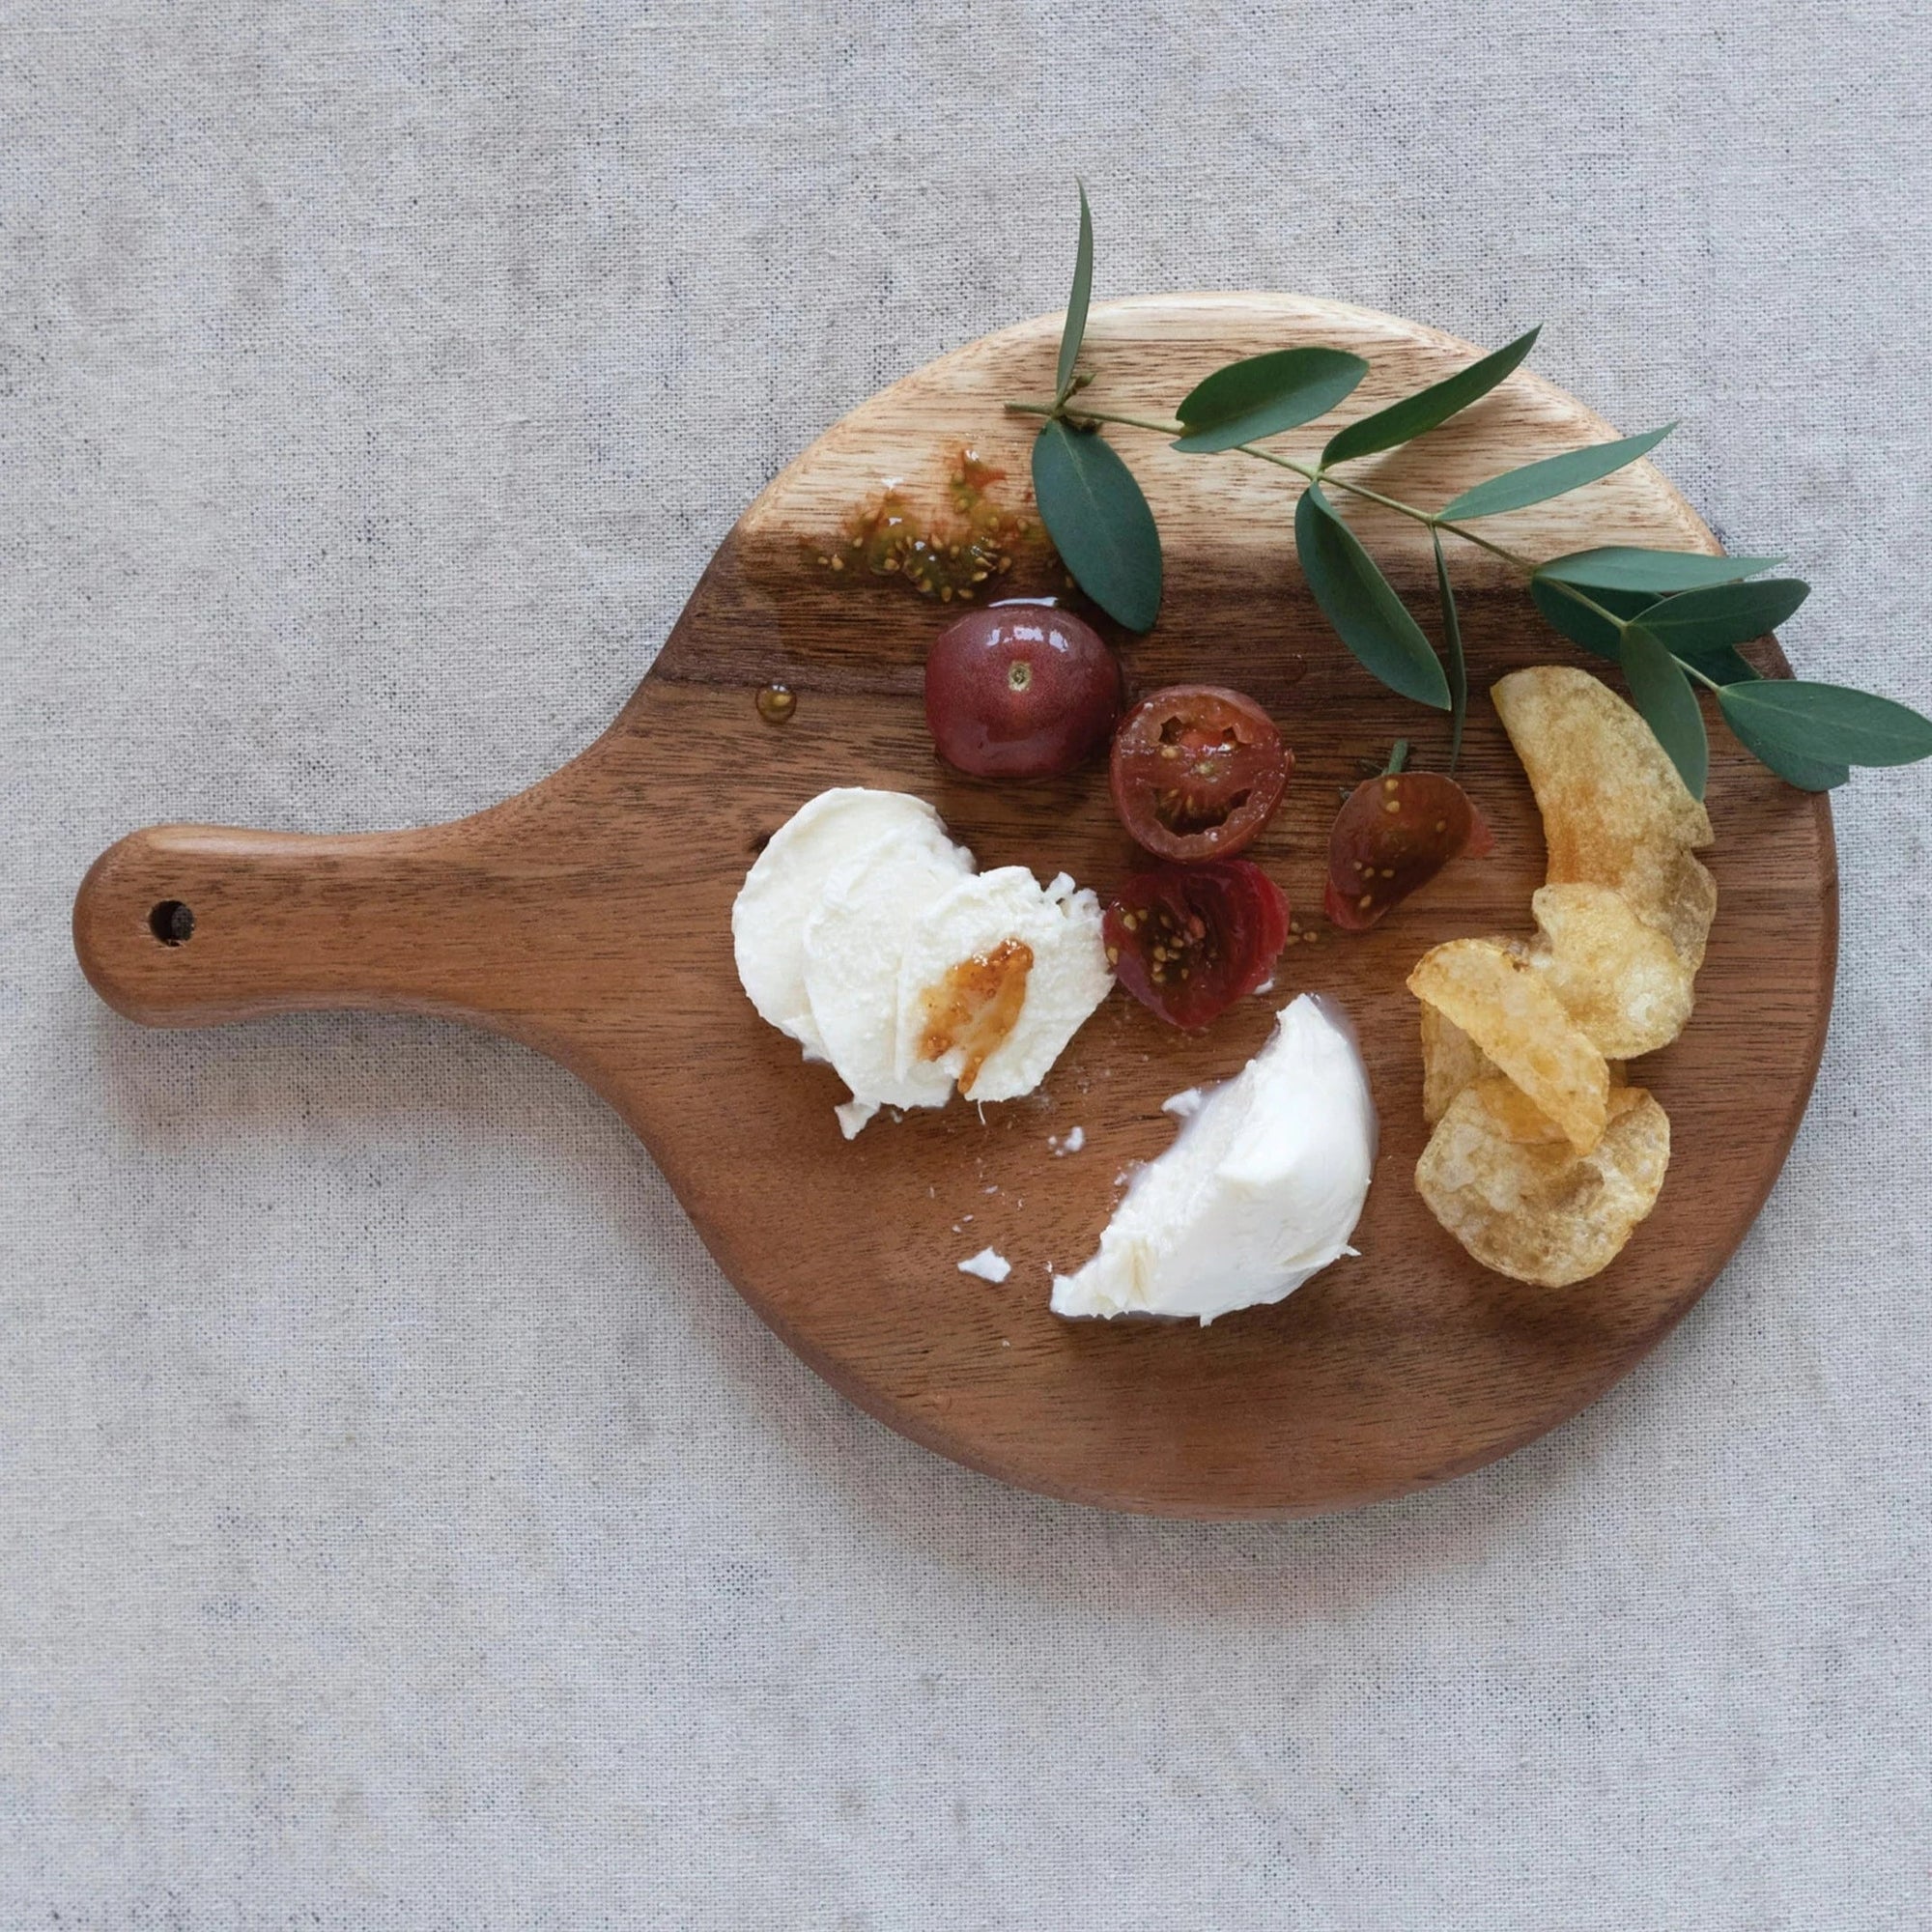 Suar Wood Cutting Board With Handle